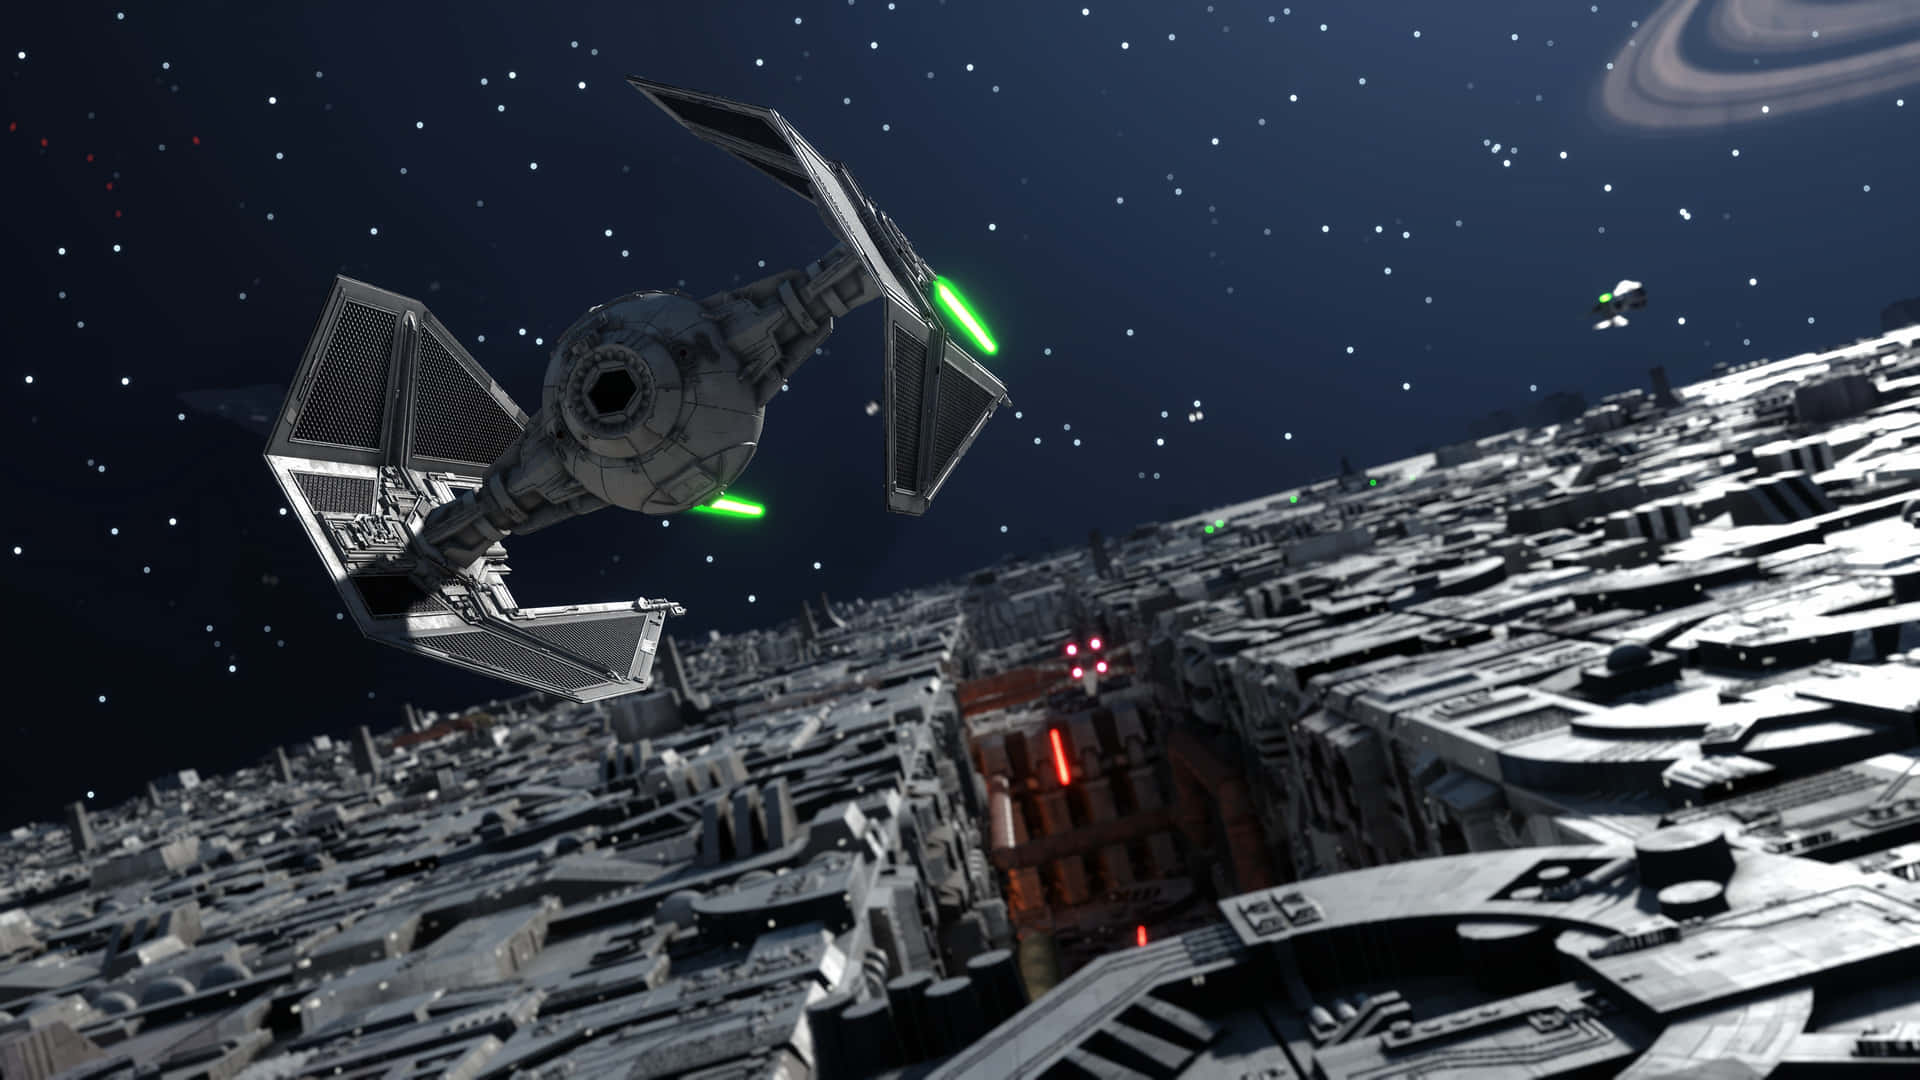 The Death Star stands tall in the night sky, ready to bring destruction upon any who oppose it. Wallpaper